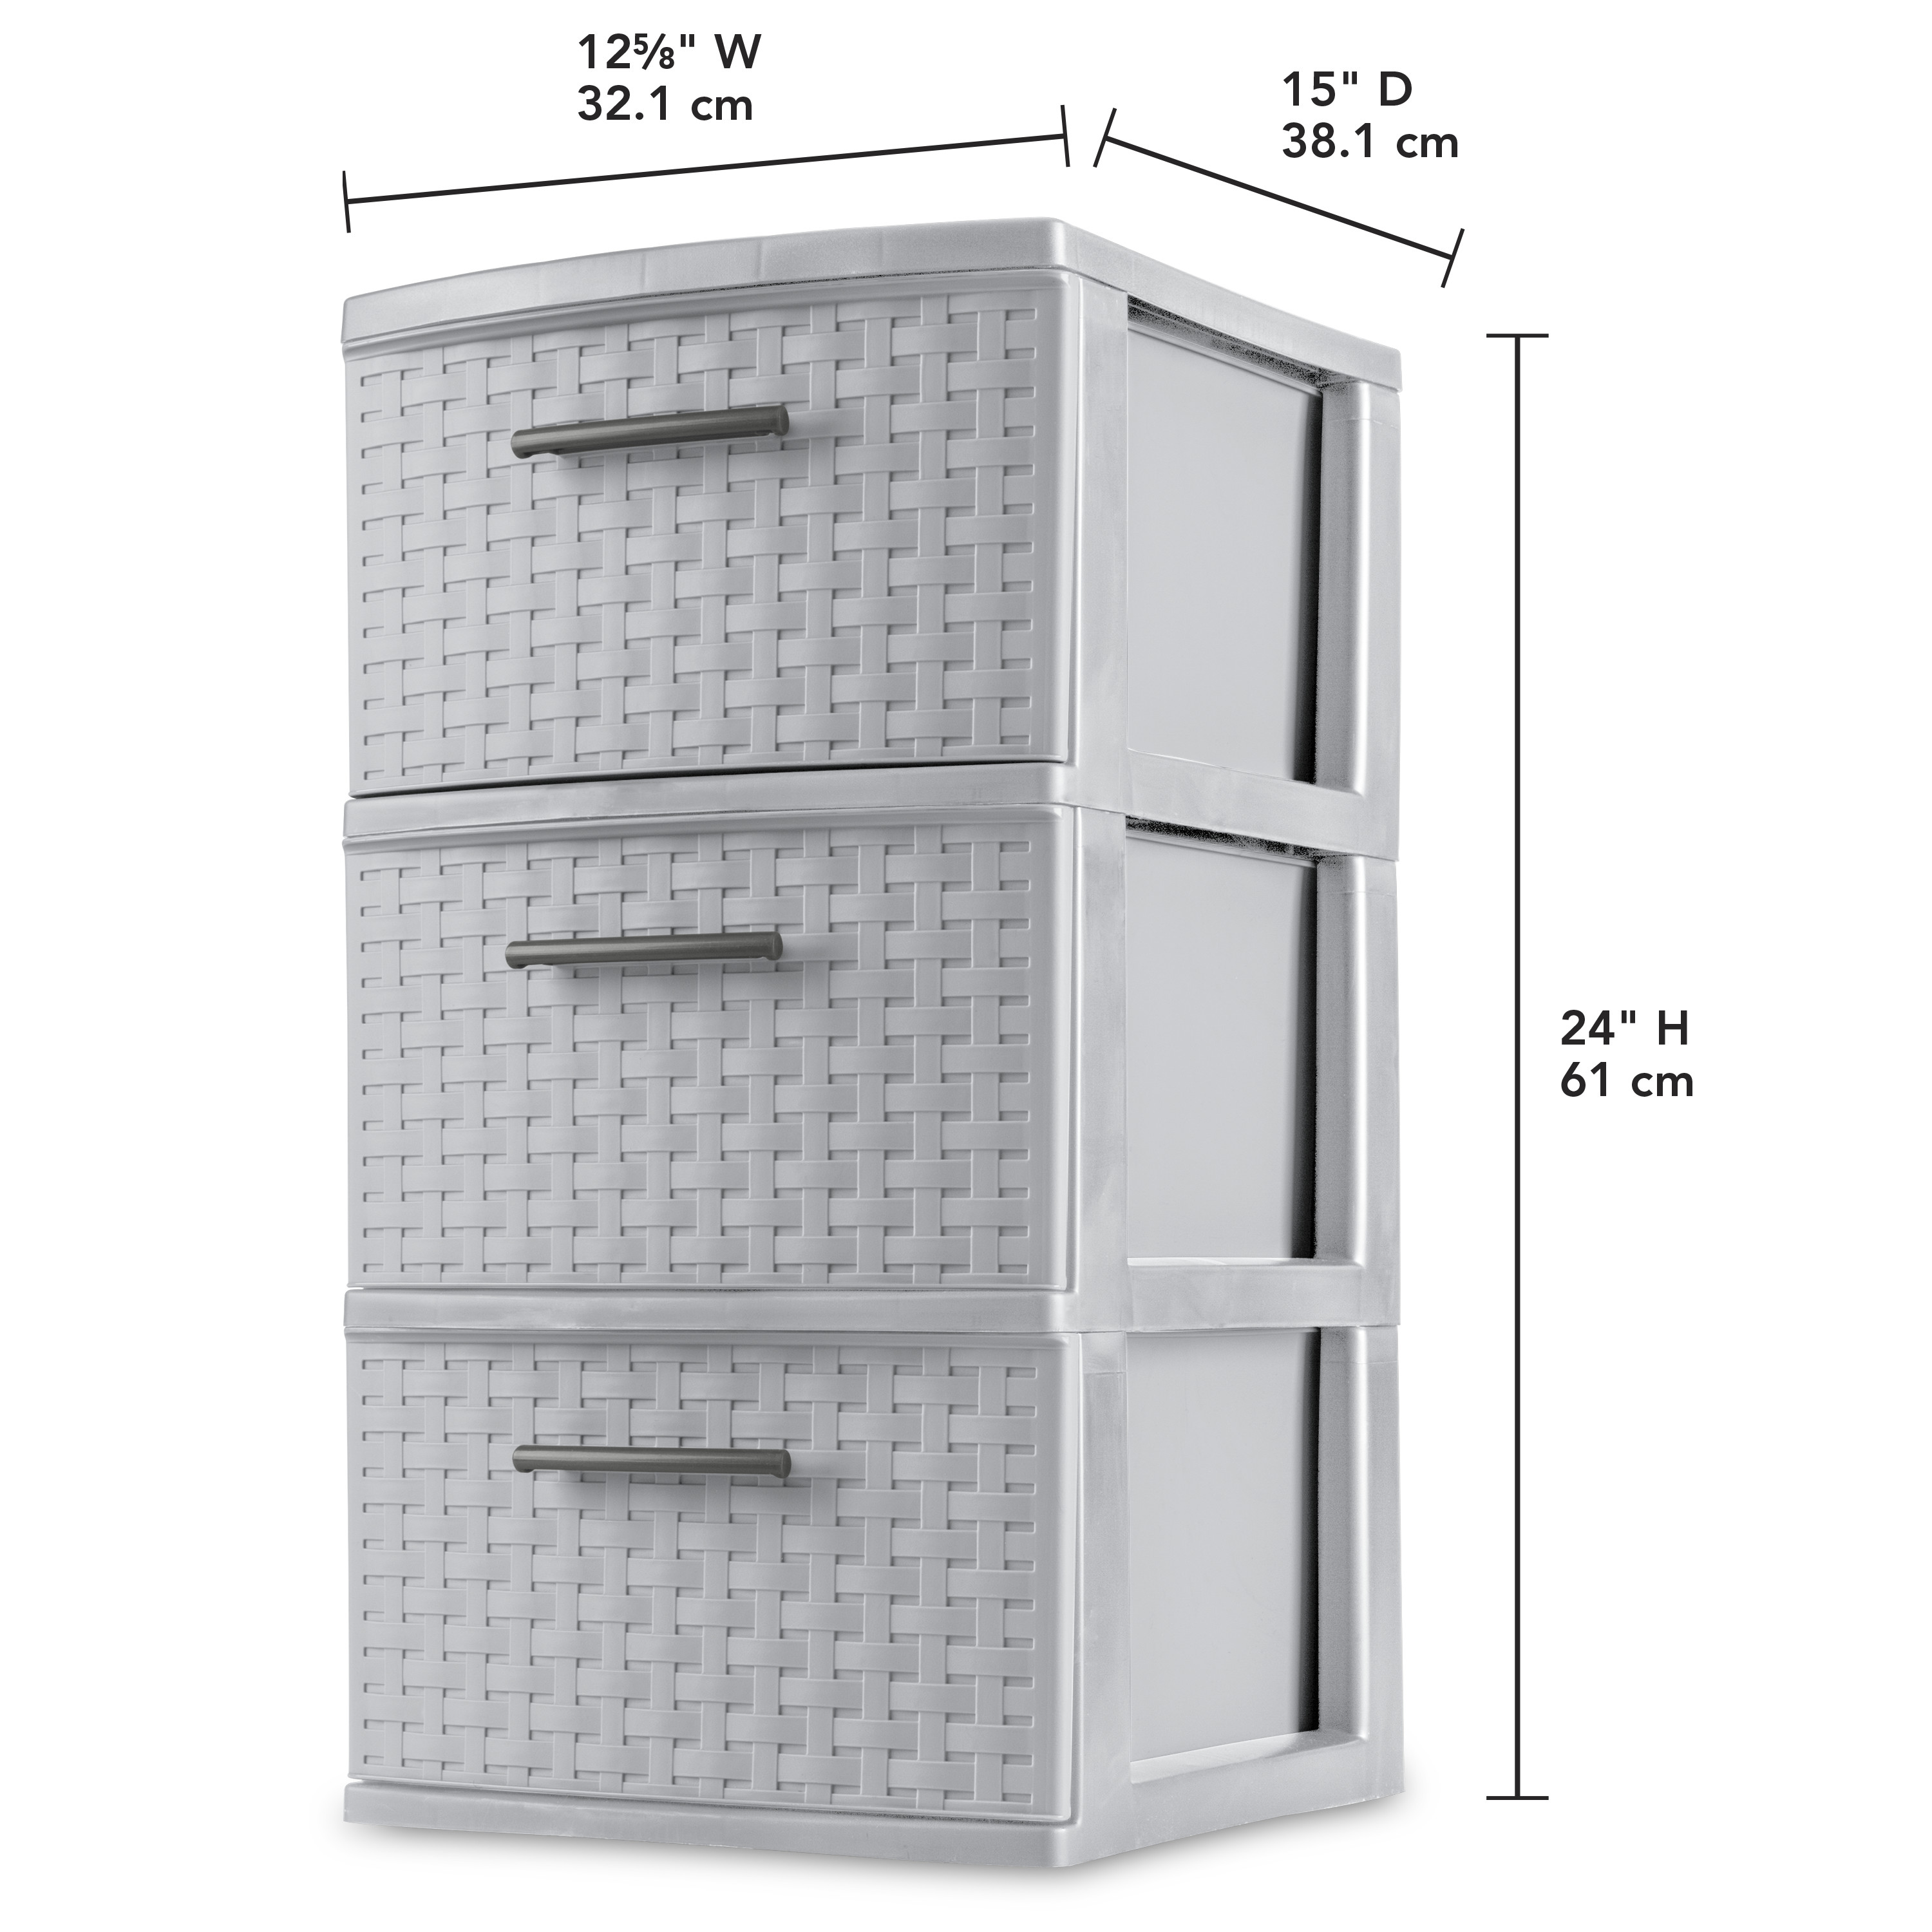 Sterilite 3 Drawer Weave Tower Plastic, Cement - image 3 of 8